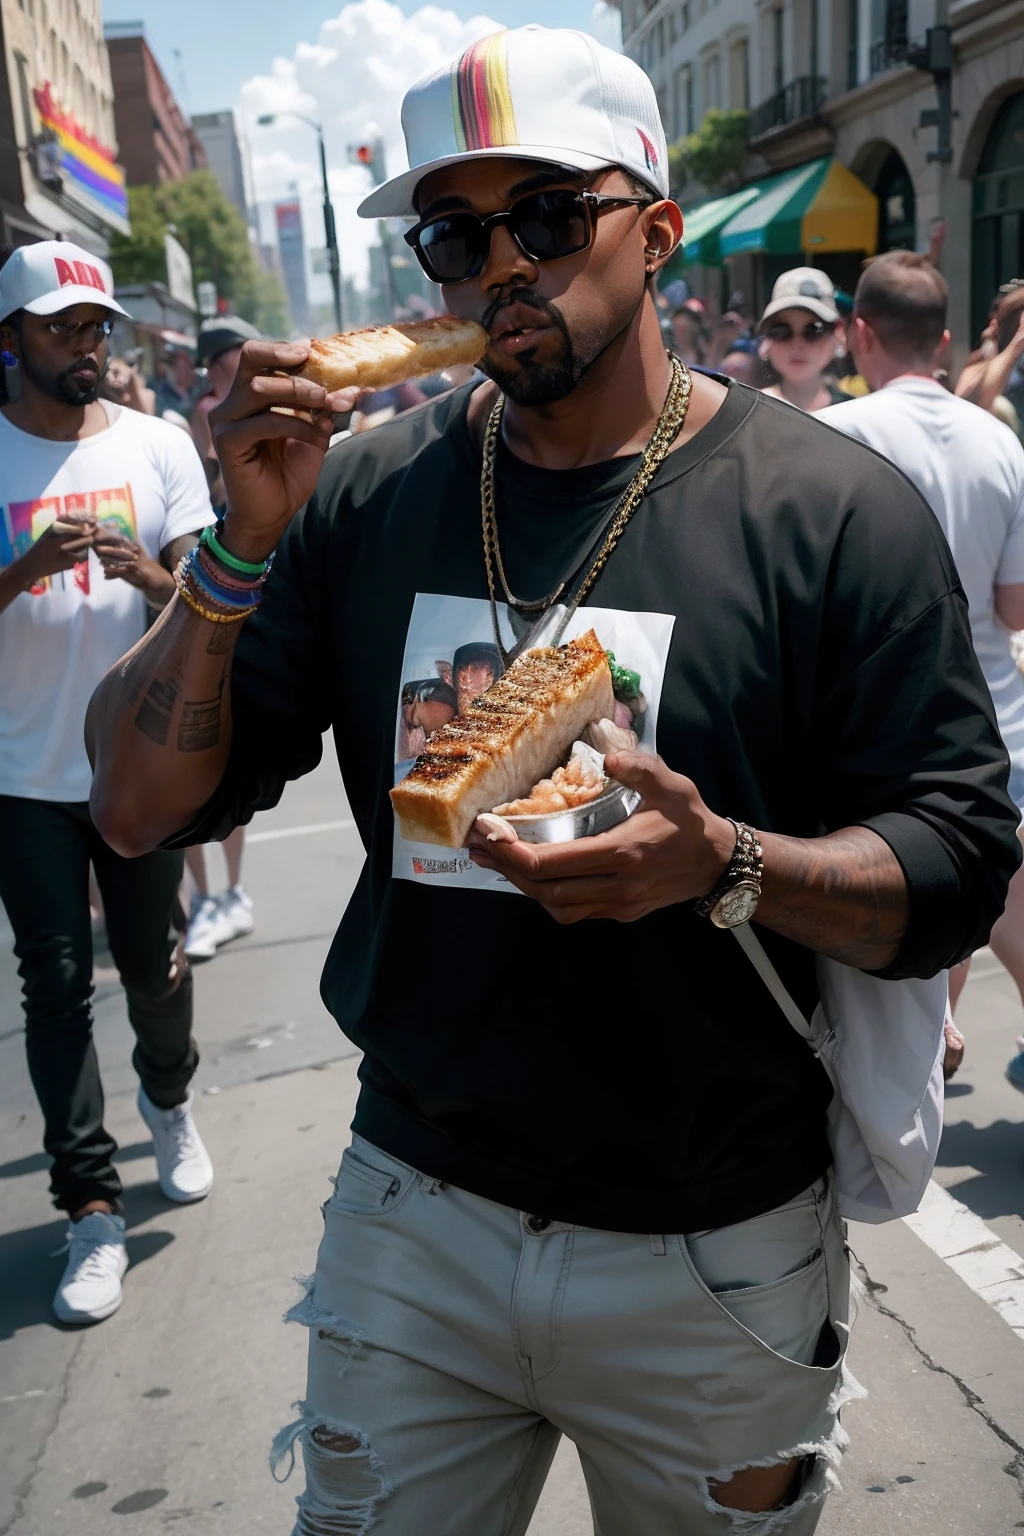 Realistic, Best Quality, Kanye West Eating Fish Sticks at a Pride Parade.